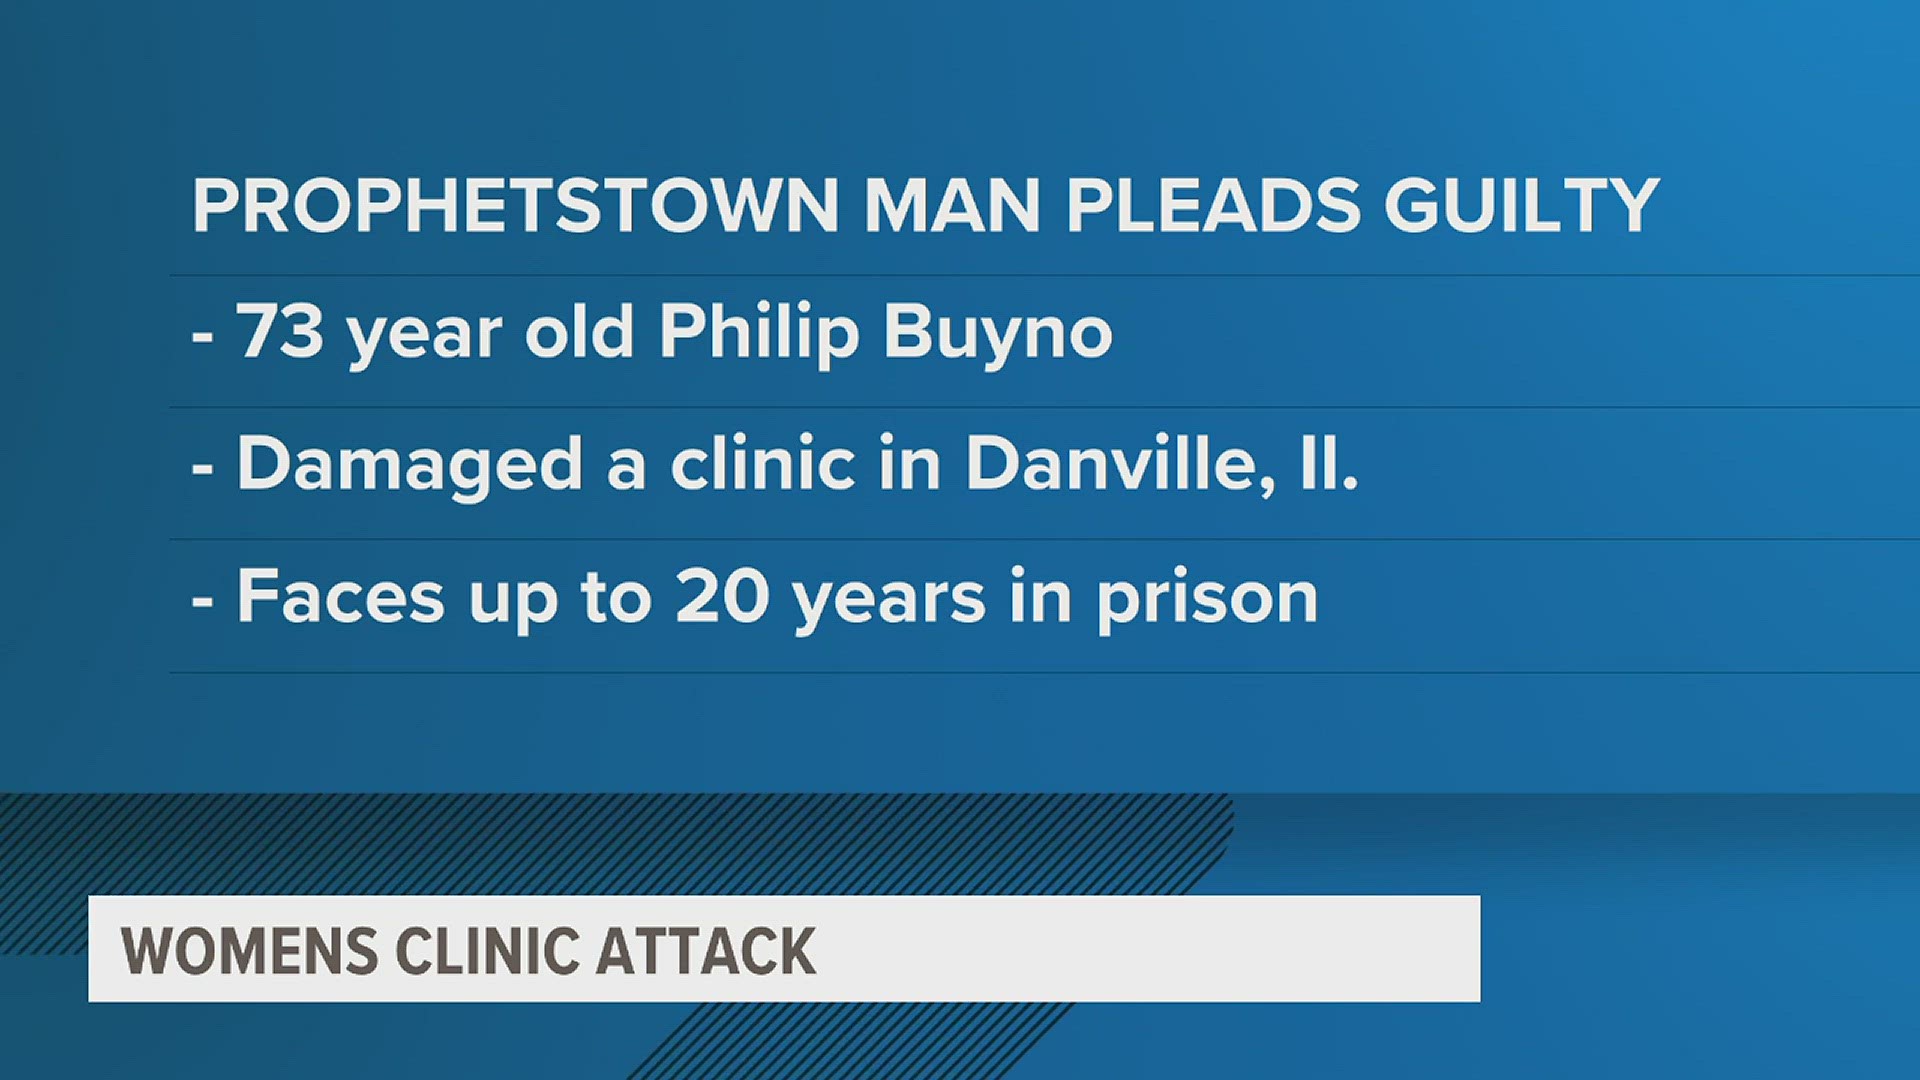 73-year-old Philip Buyno of Prophetstown pleaded guilty on Wednesday, four months after he rammed his car into a facility in Danville, Illinois.